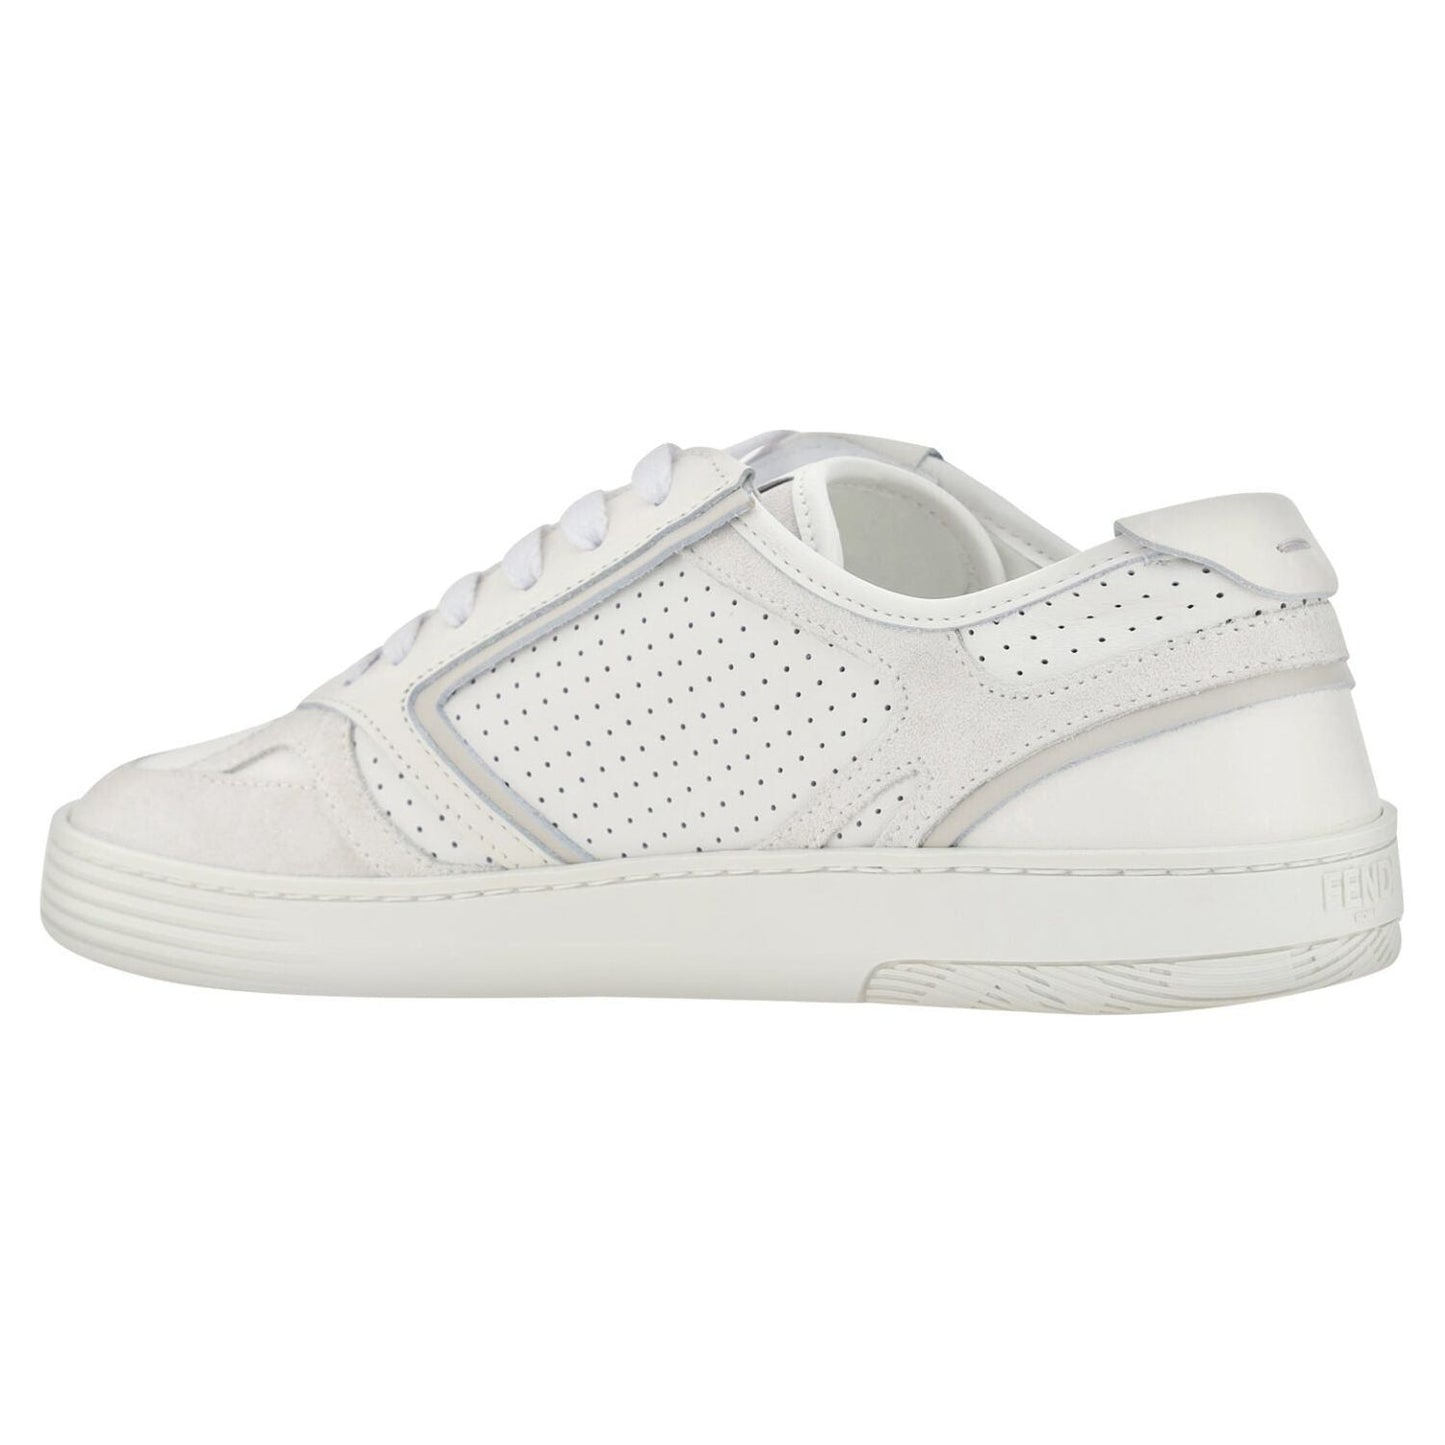 Fendi White Calf Leather Low Top Sneakers white-calf-leather-low-top-sneakers